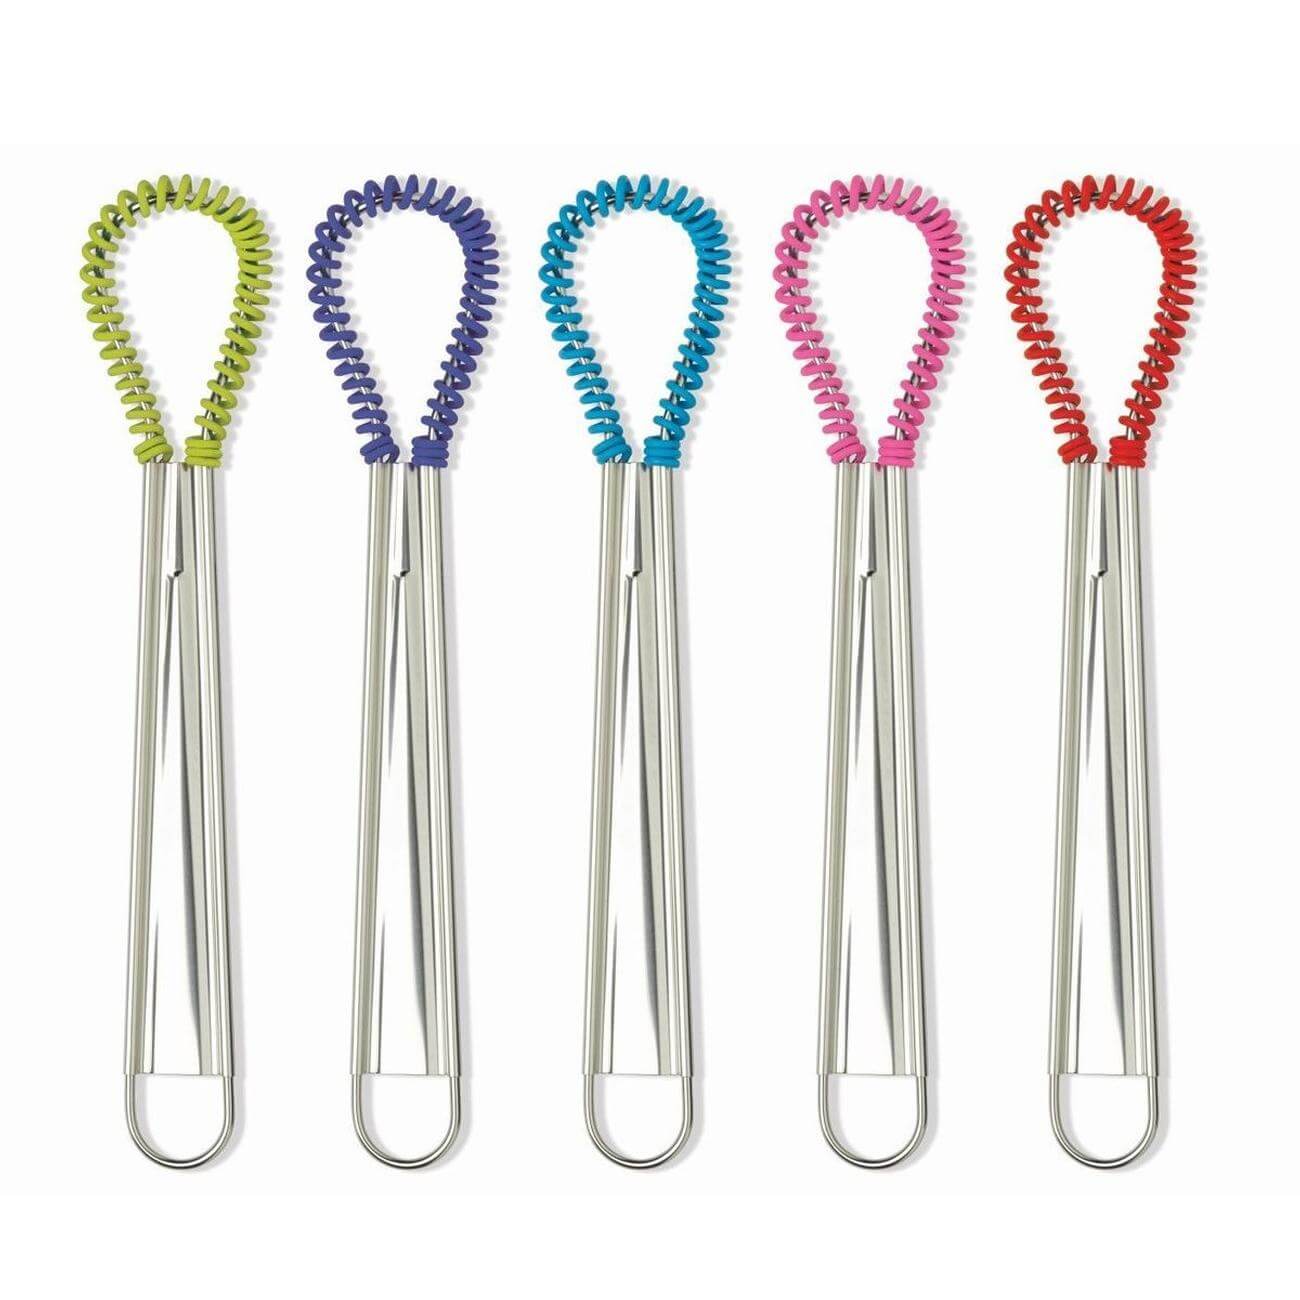 Zeal Silicone Sauce Whisk Large